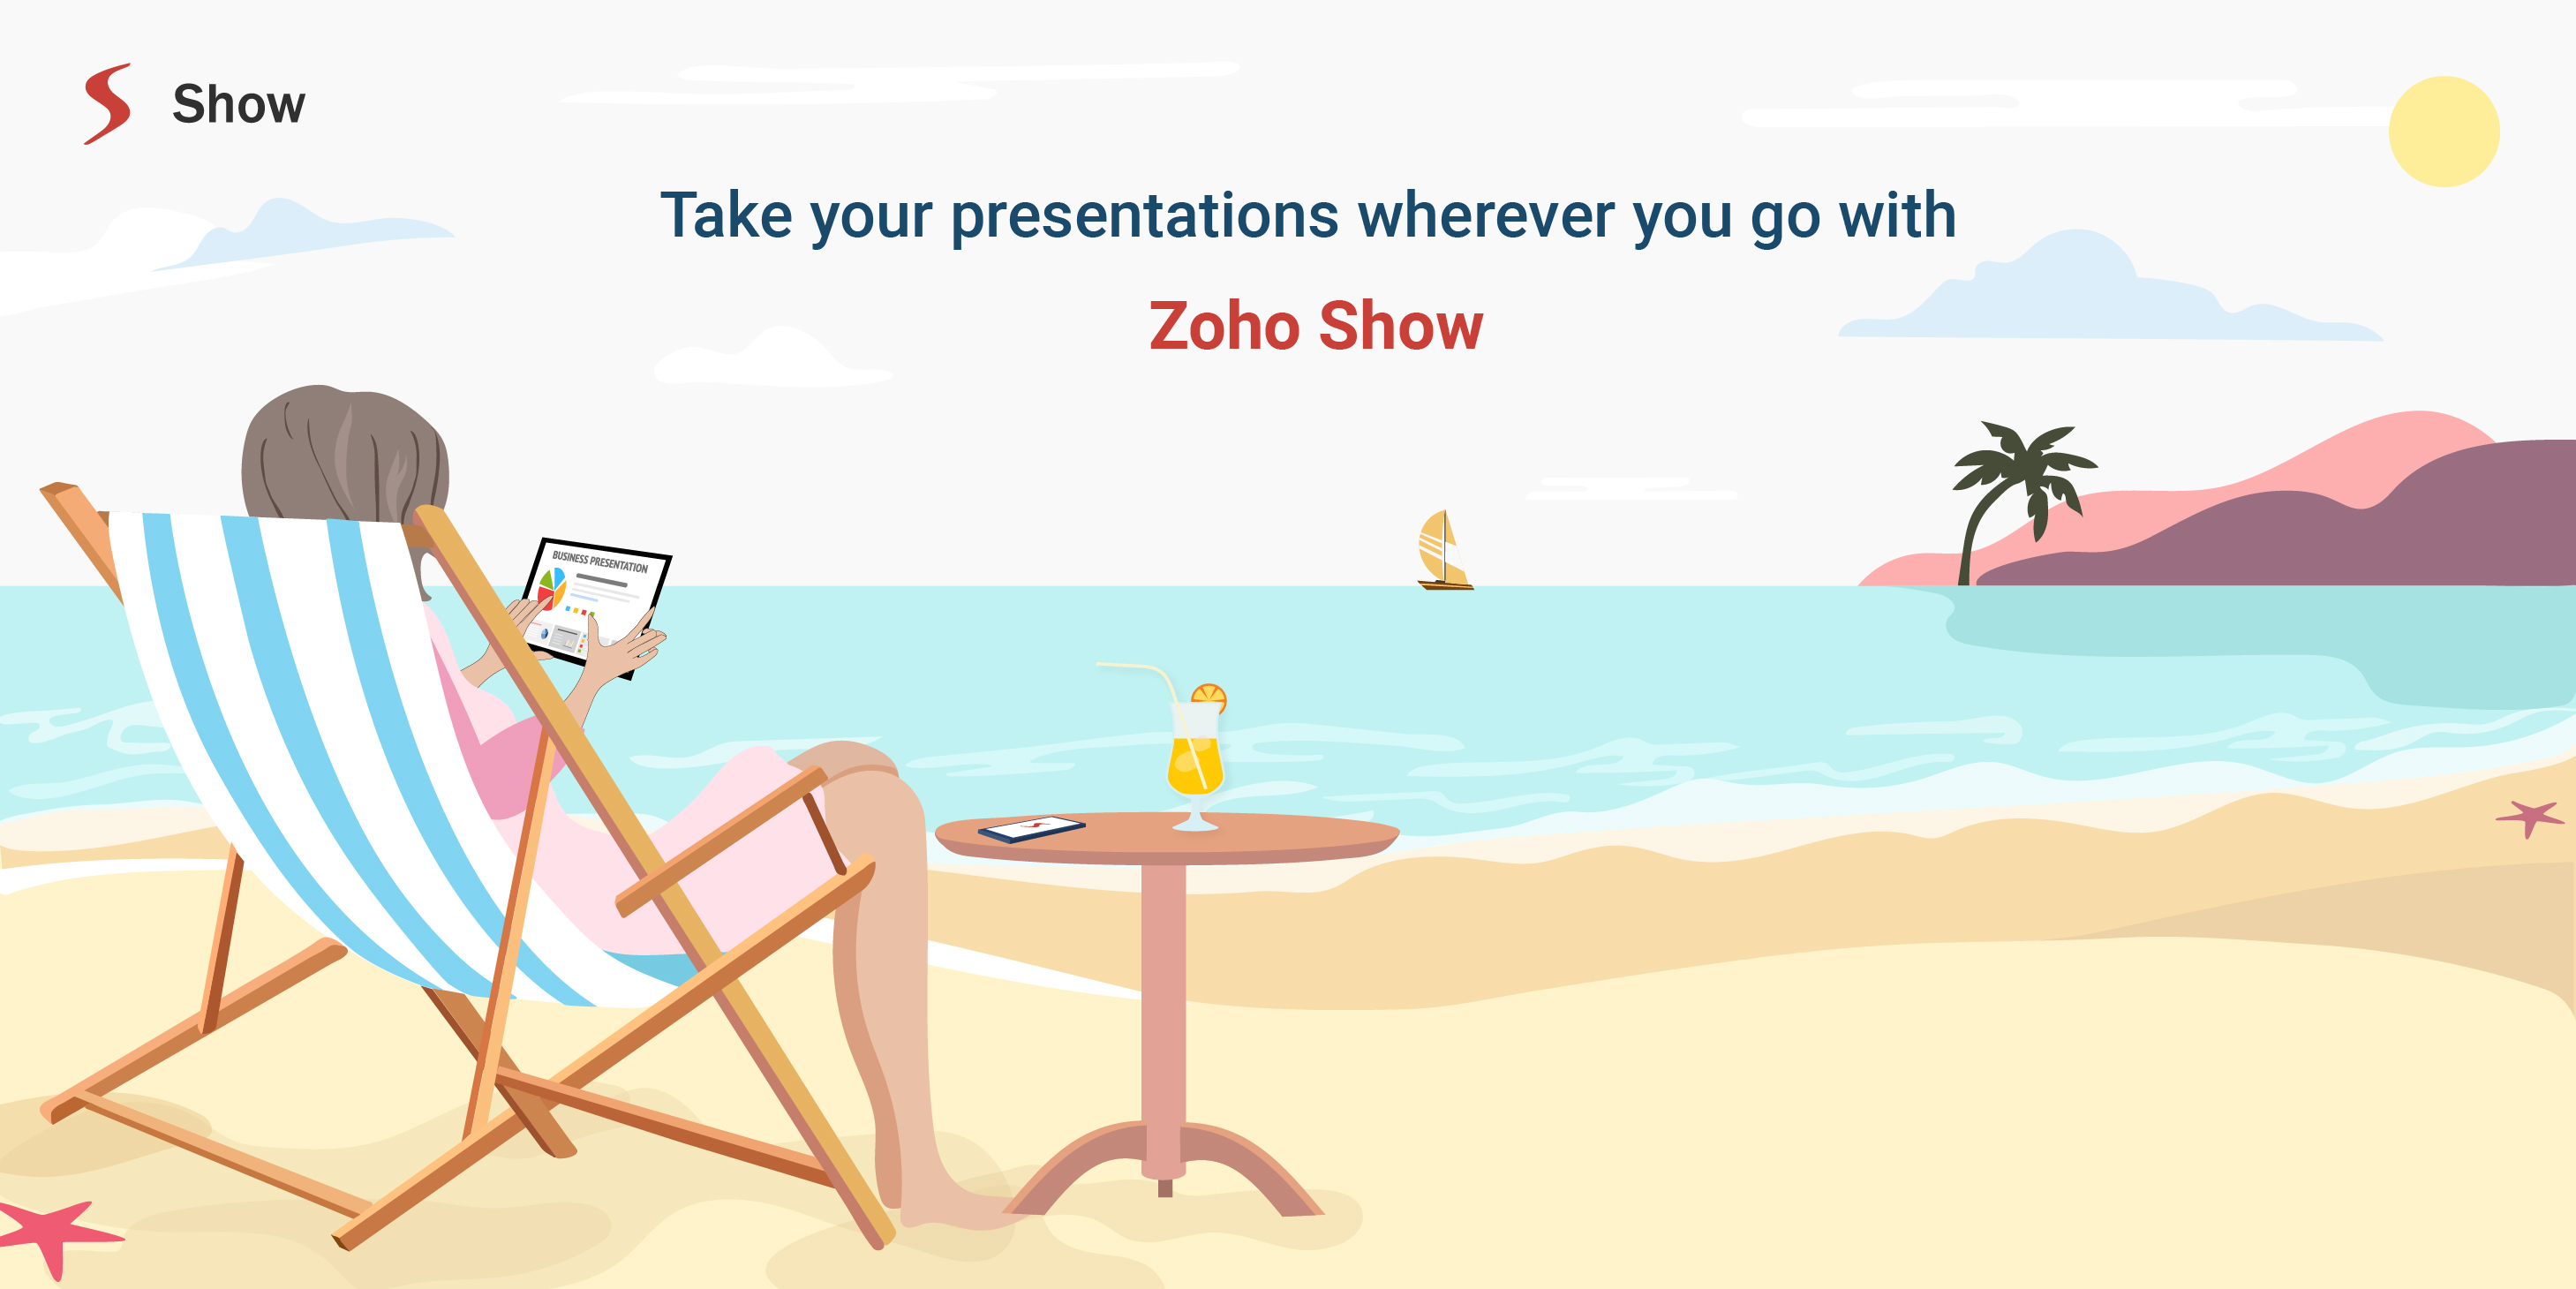 Zoho Show for Android - Carry your presentations in your pocket